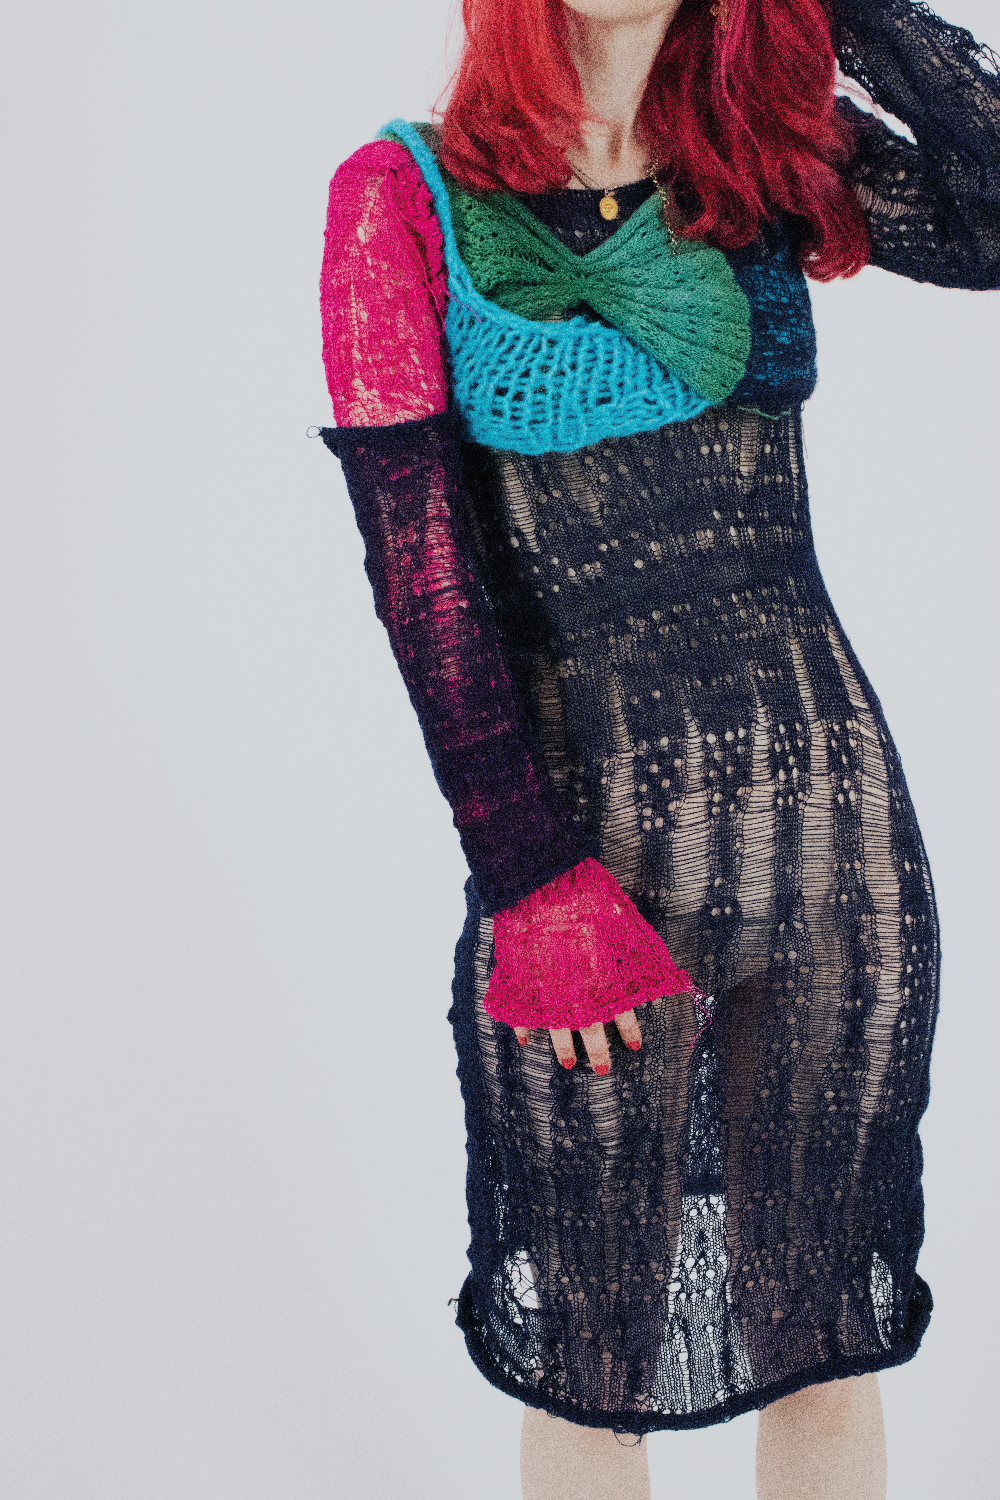 Model wearing Outfit 2 photographed by Ciara Roche is a combination of hand and machine knitted pieces. Main dress is black with long sleeves, one sleeve hot pink, layered pieces over the top part of dress in blue and green.